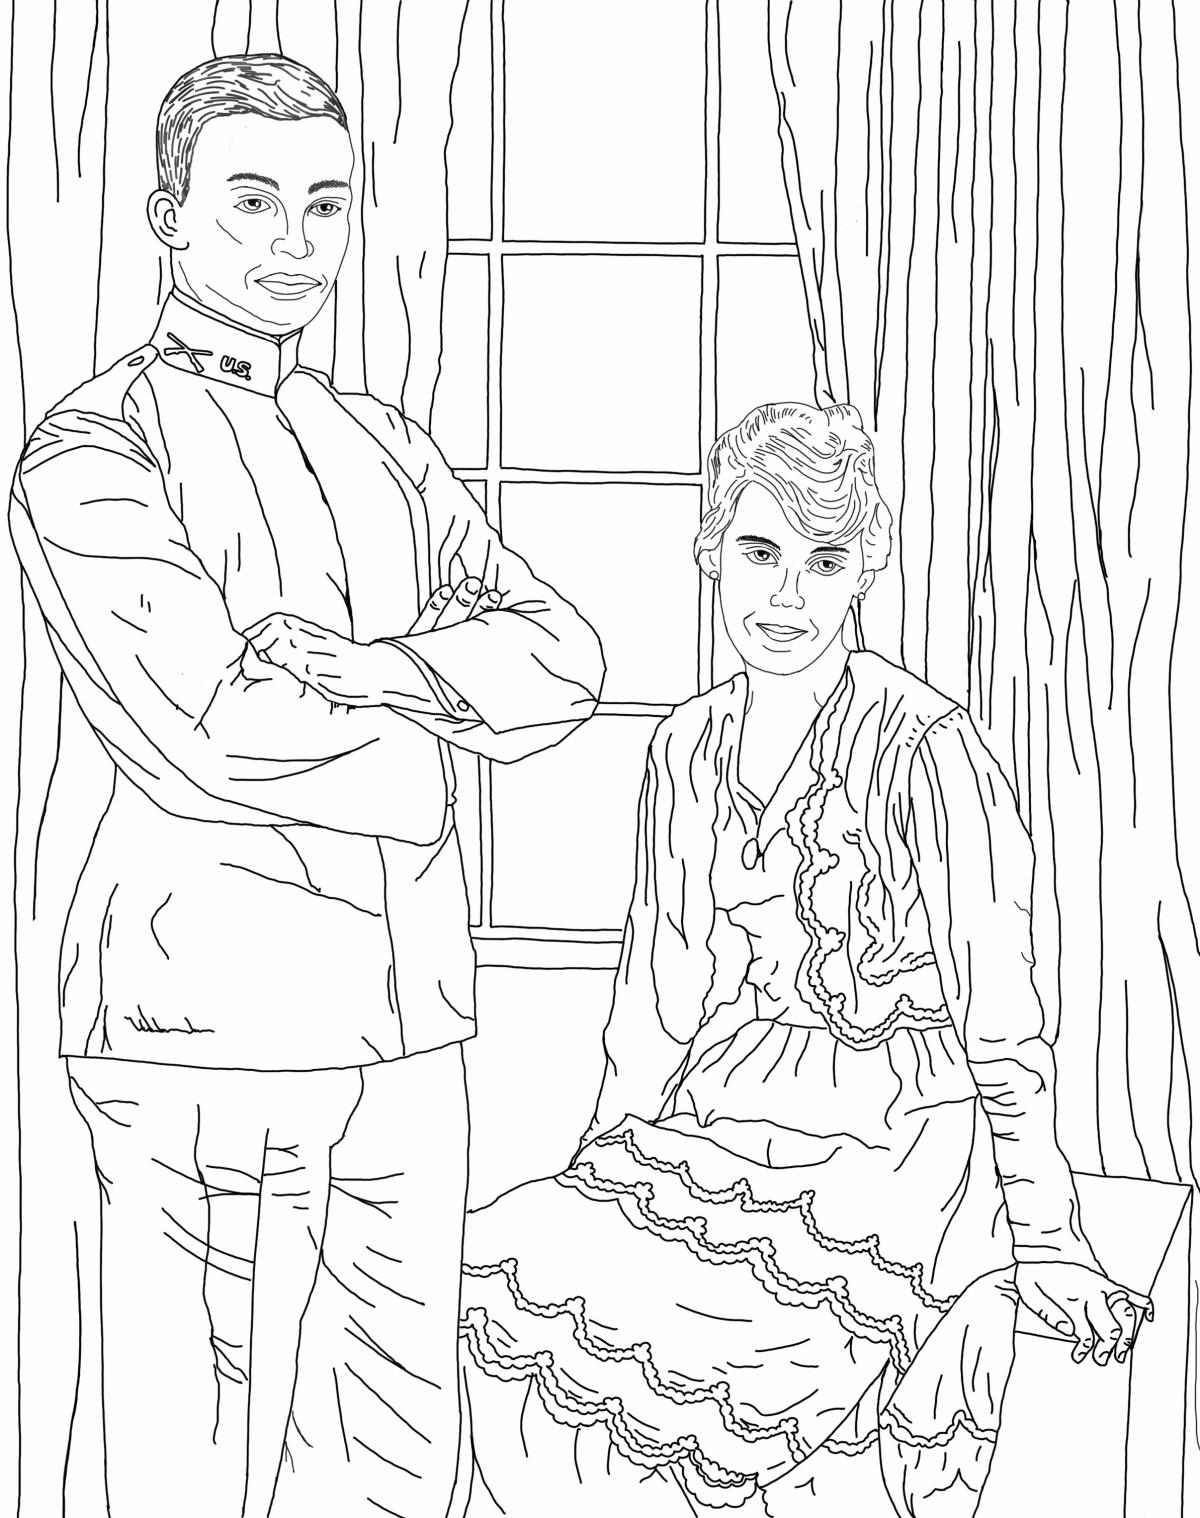 Dwight and Mamie Wedding Photo - coloring page JPG